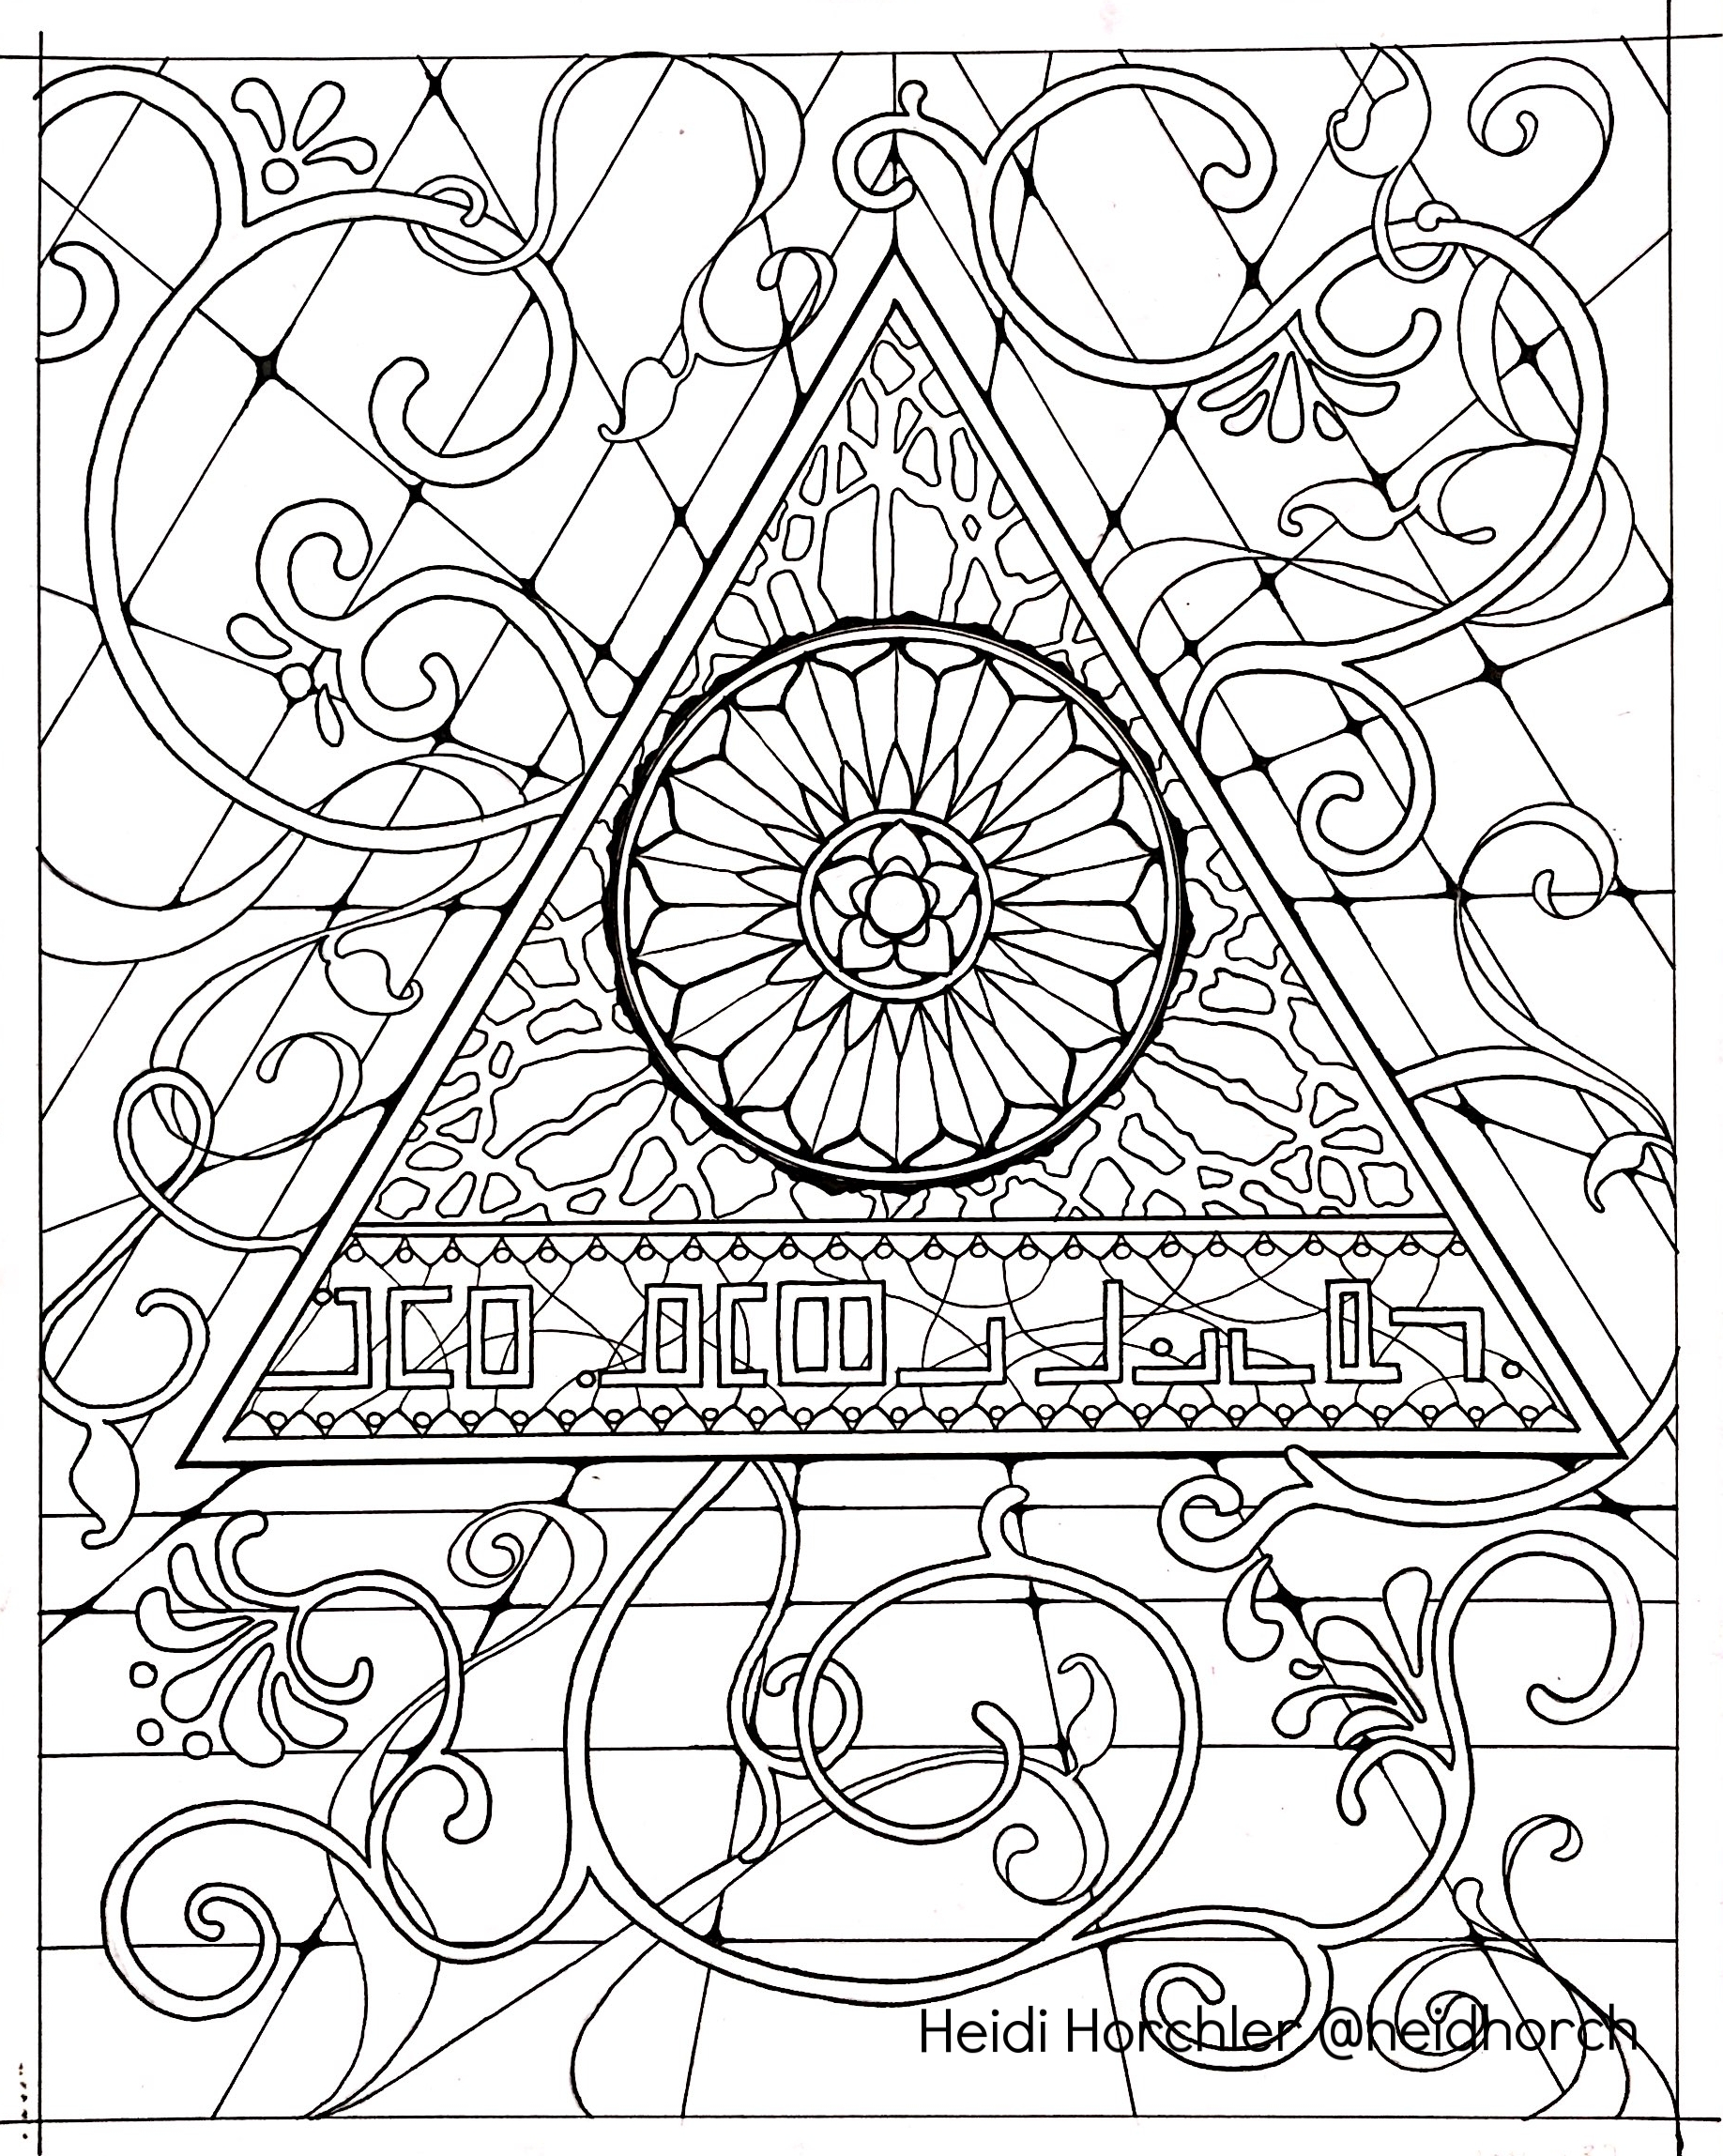 Inscription - Daydream Odyssey coloring page